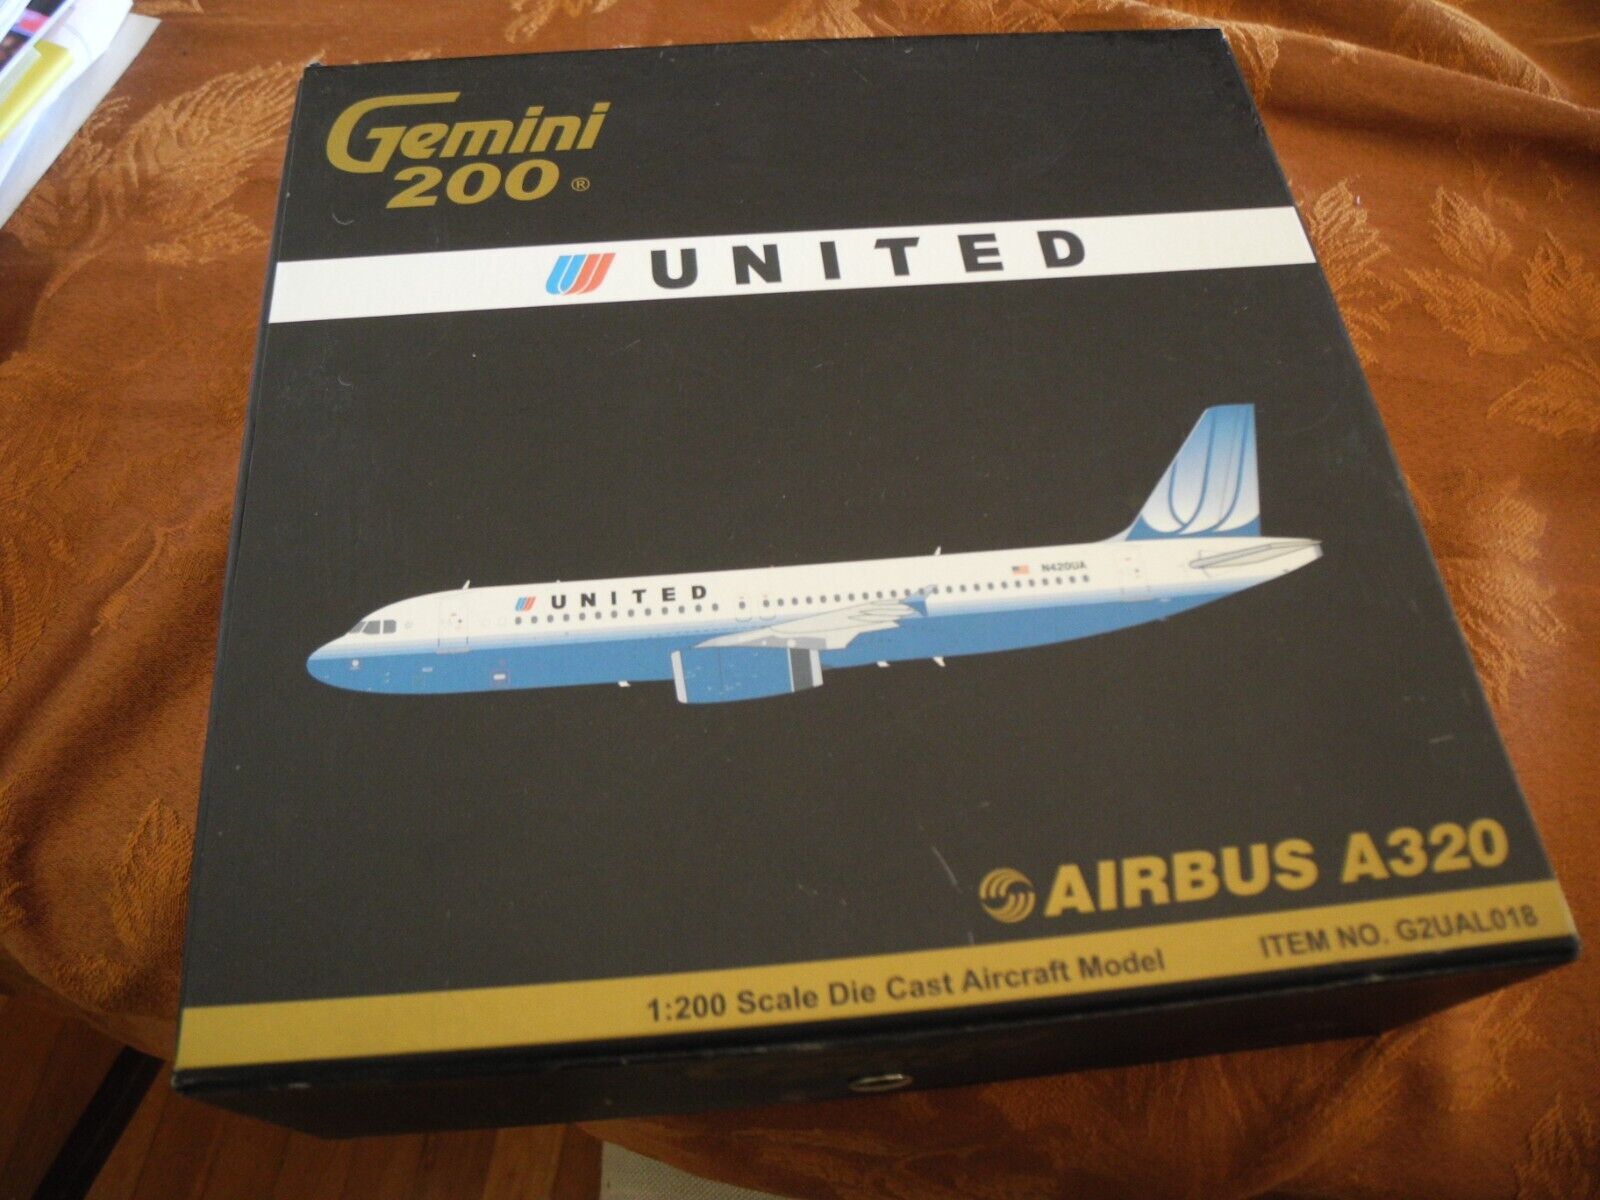 Extremely Rare GEMINI Airbus A320 UNITED, Orig Version, Retired